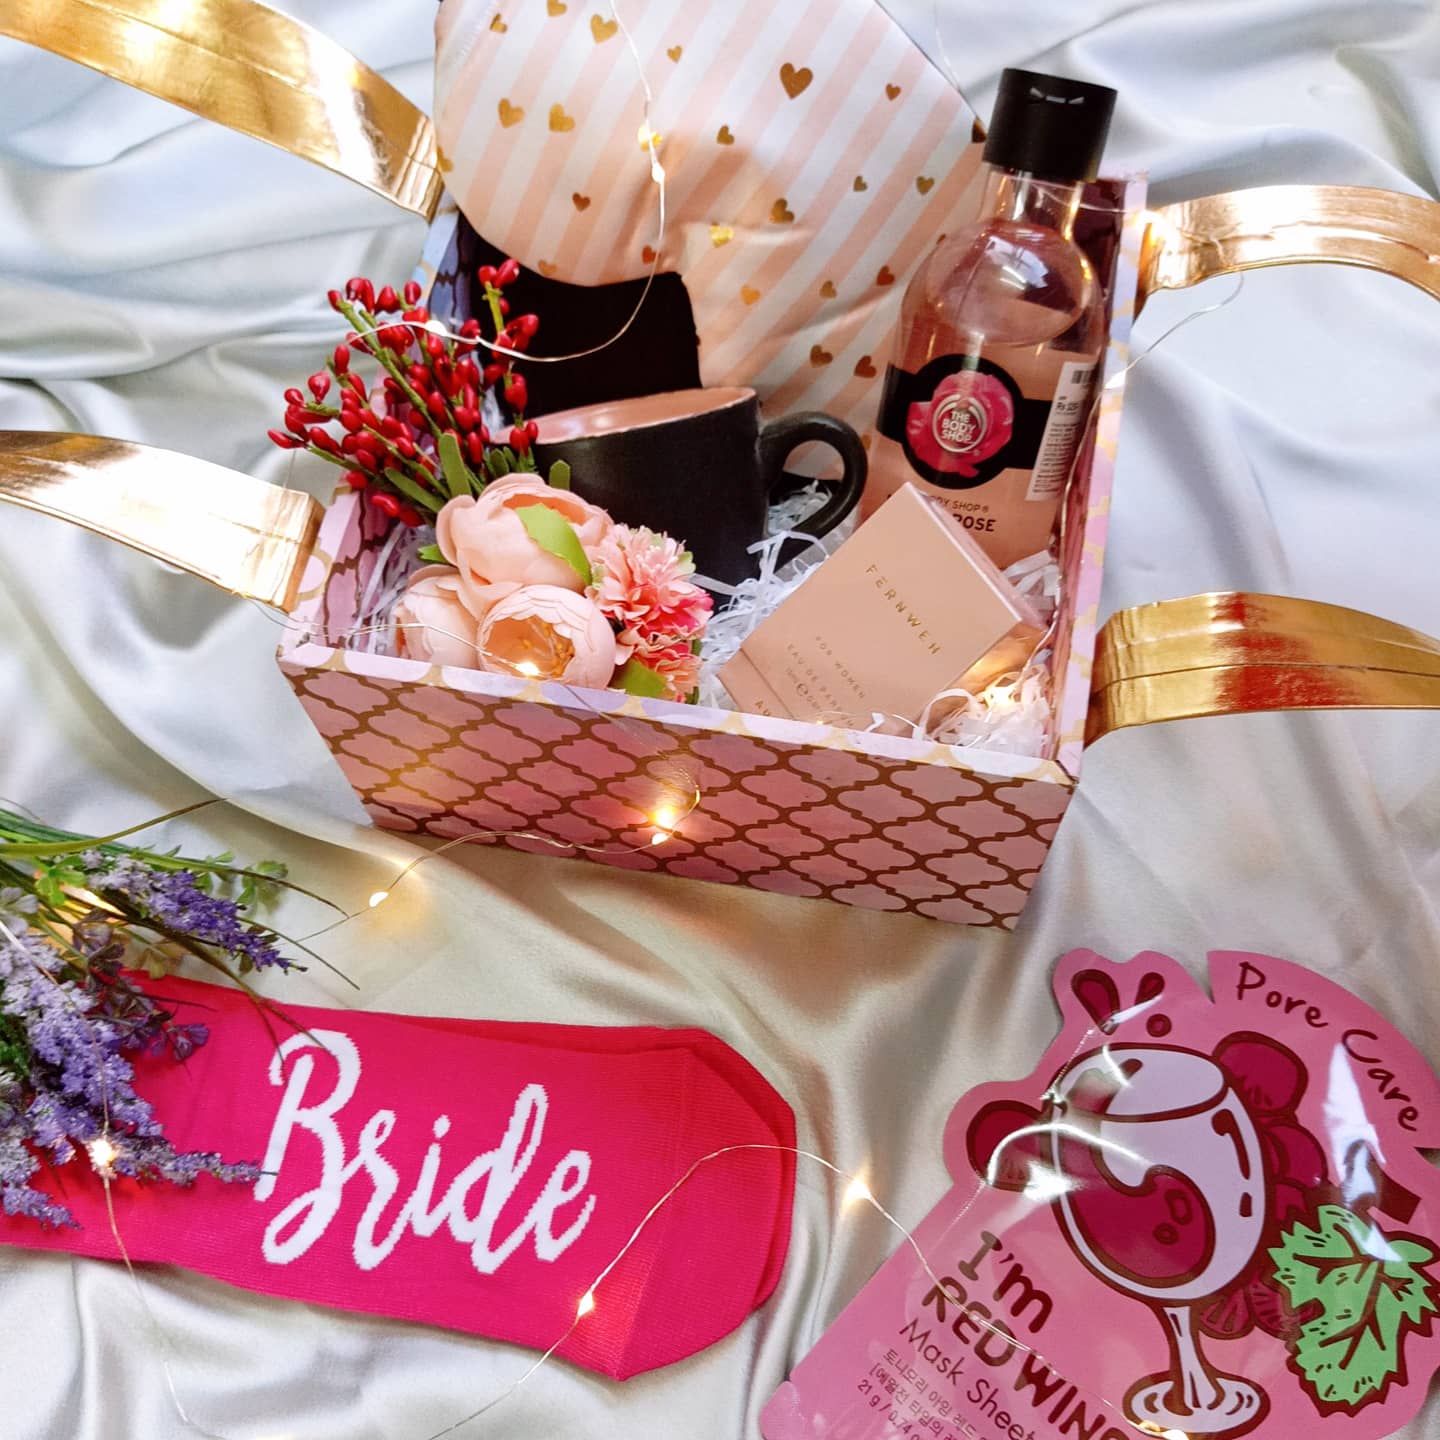 Premiere Wedding Gift For Bride Bridal Gift Ideas -Angroos